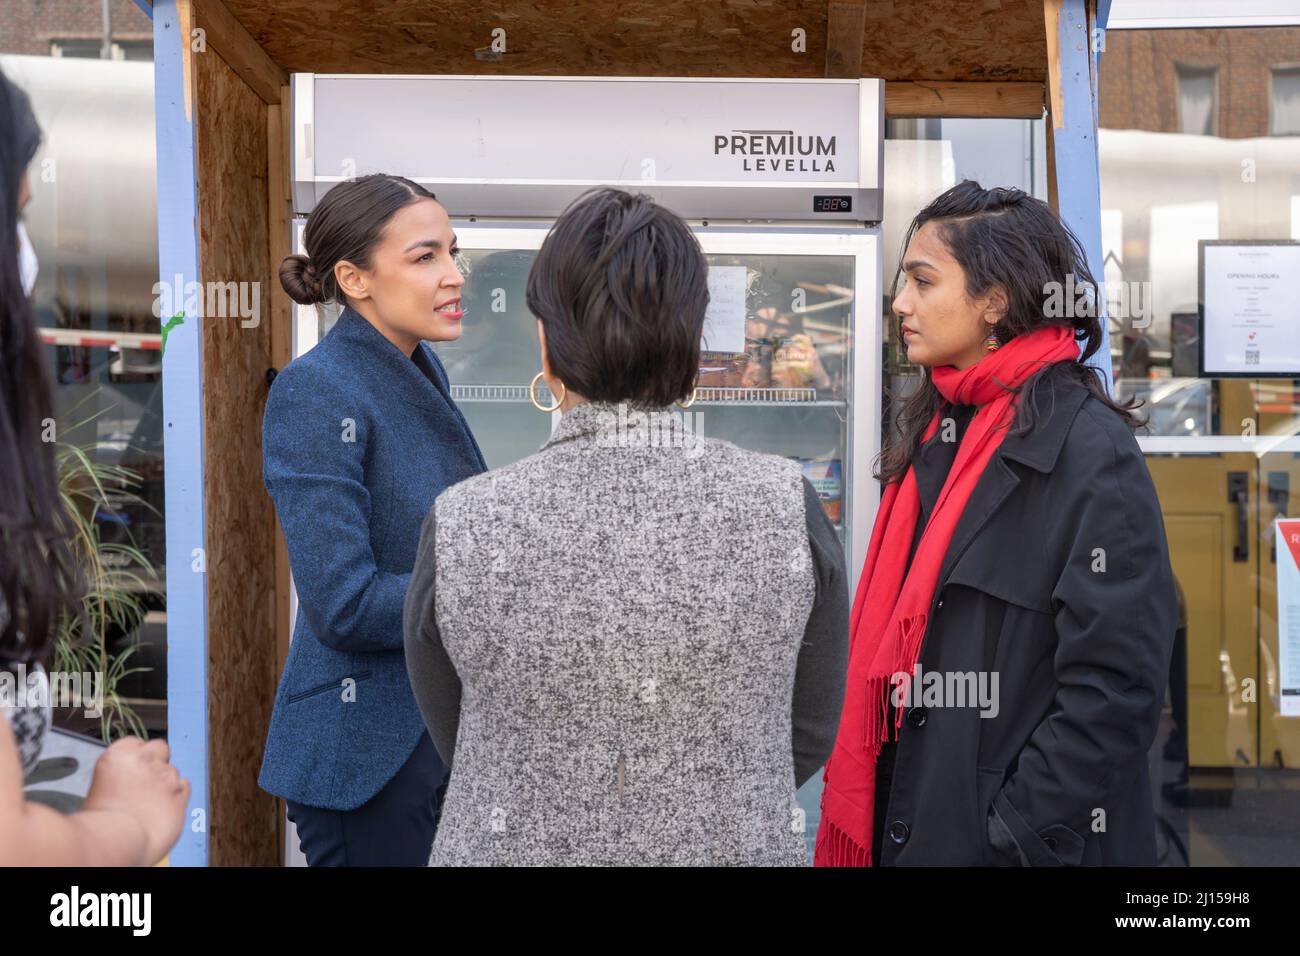 NEW YORK, NY – MARCH 22: United States Congresswoman Alexandria Ocasio-Cortez talks with local activist by a neighborhood fridge outside the Queensboro restaurant in Jackson Heights on March 22, 2022 in New York City.  Representative Alexandria Ocasio-Cortez presents a proclamation honoring the Queensboro restaurant's owners and workers in Jackson Heights neighborhood for serving over 500 meals to community members facing food insecurity during the height of the COVID-19 pandemic. Credit: Ron Adar/Alamy Live News Stock Photo